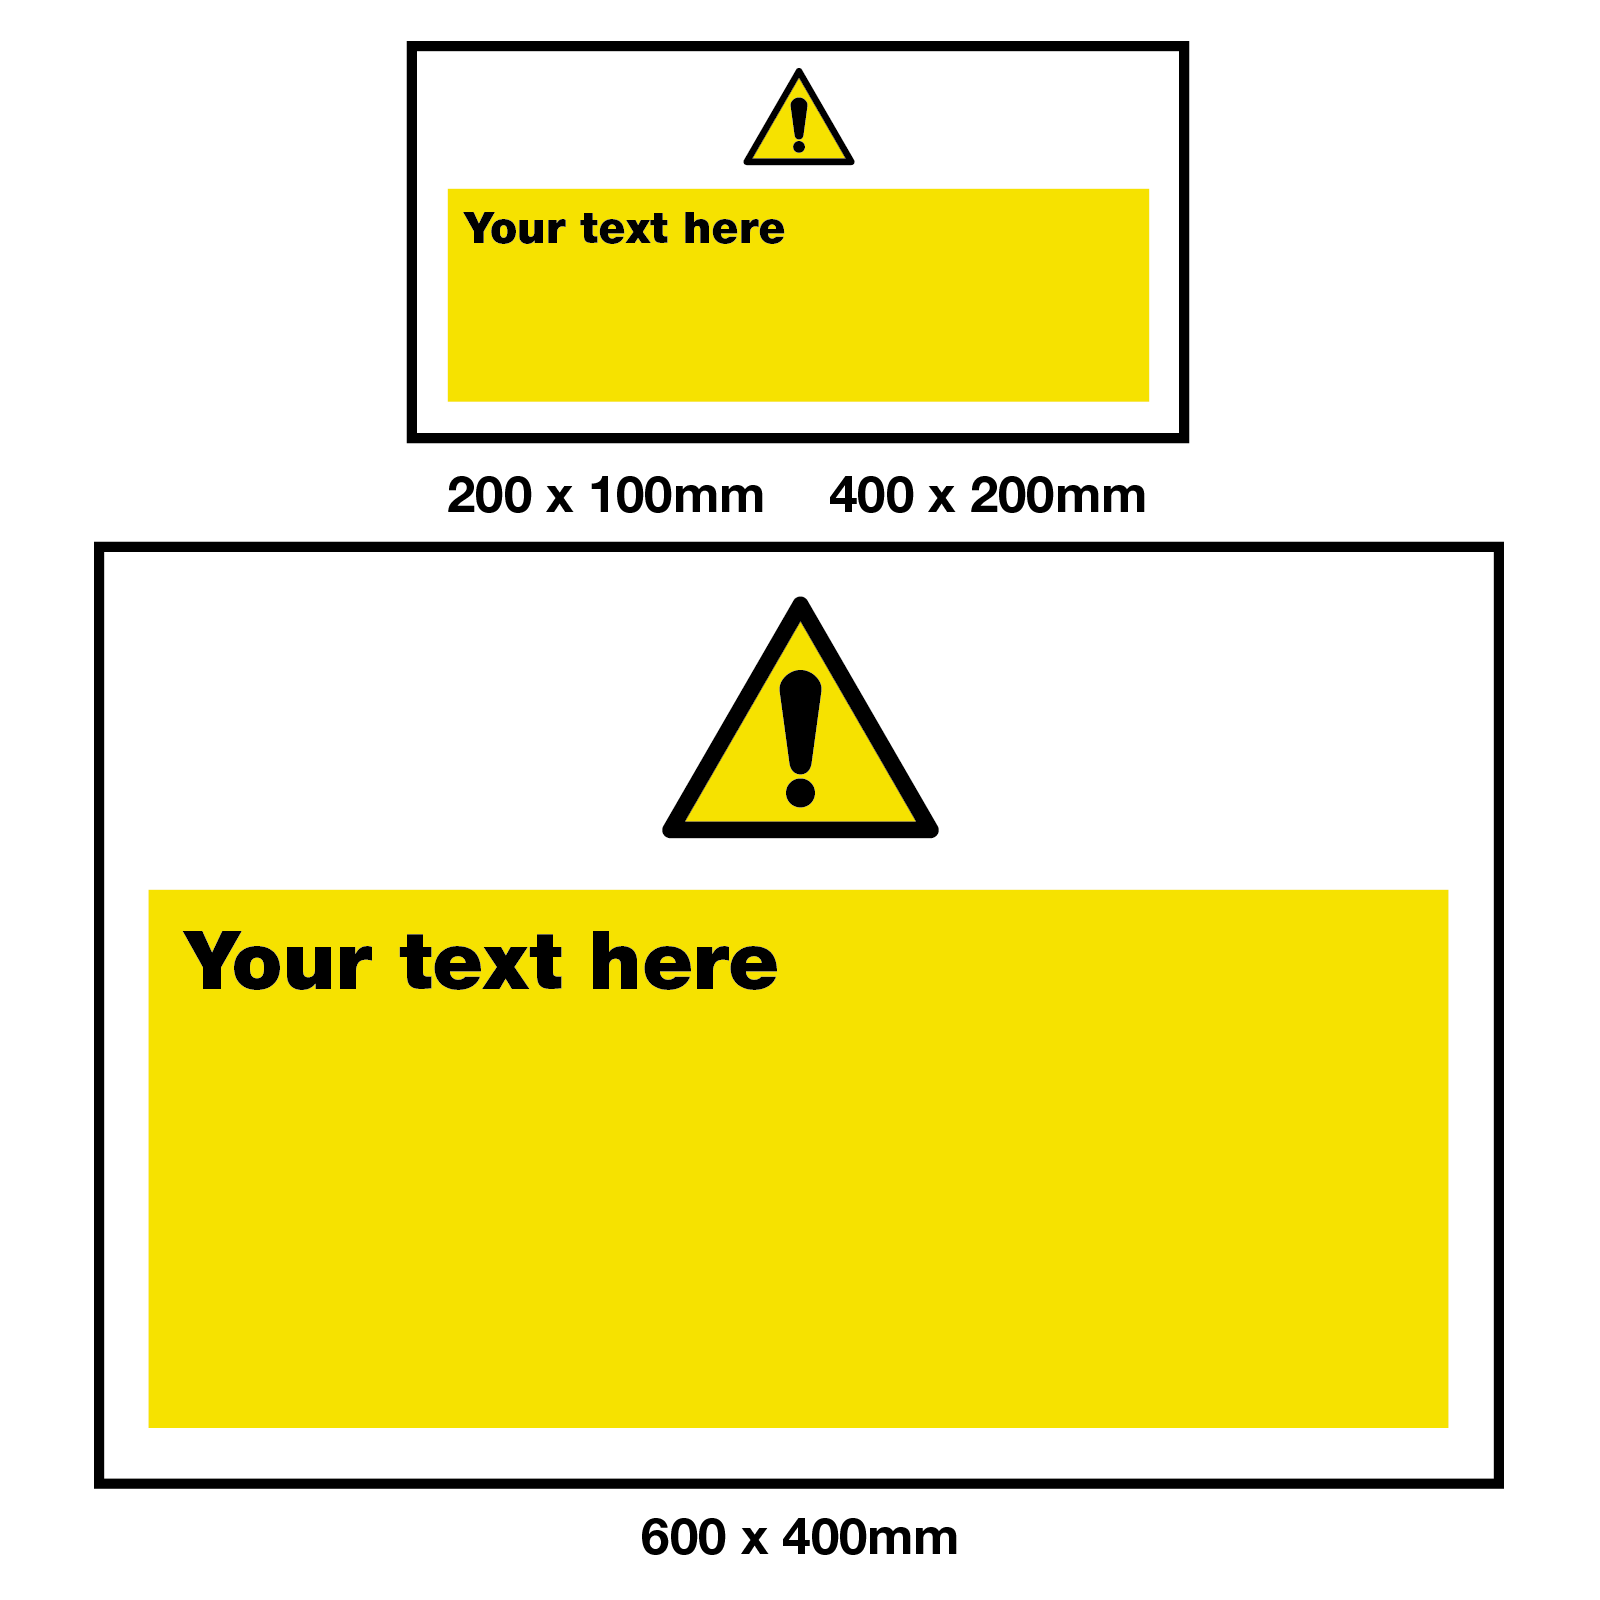 Create your own Warning Safety Sign - Style 1